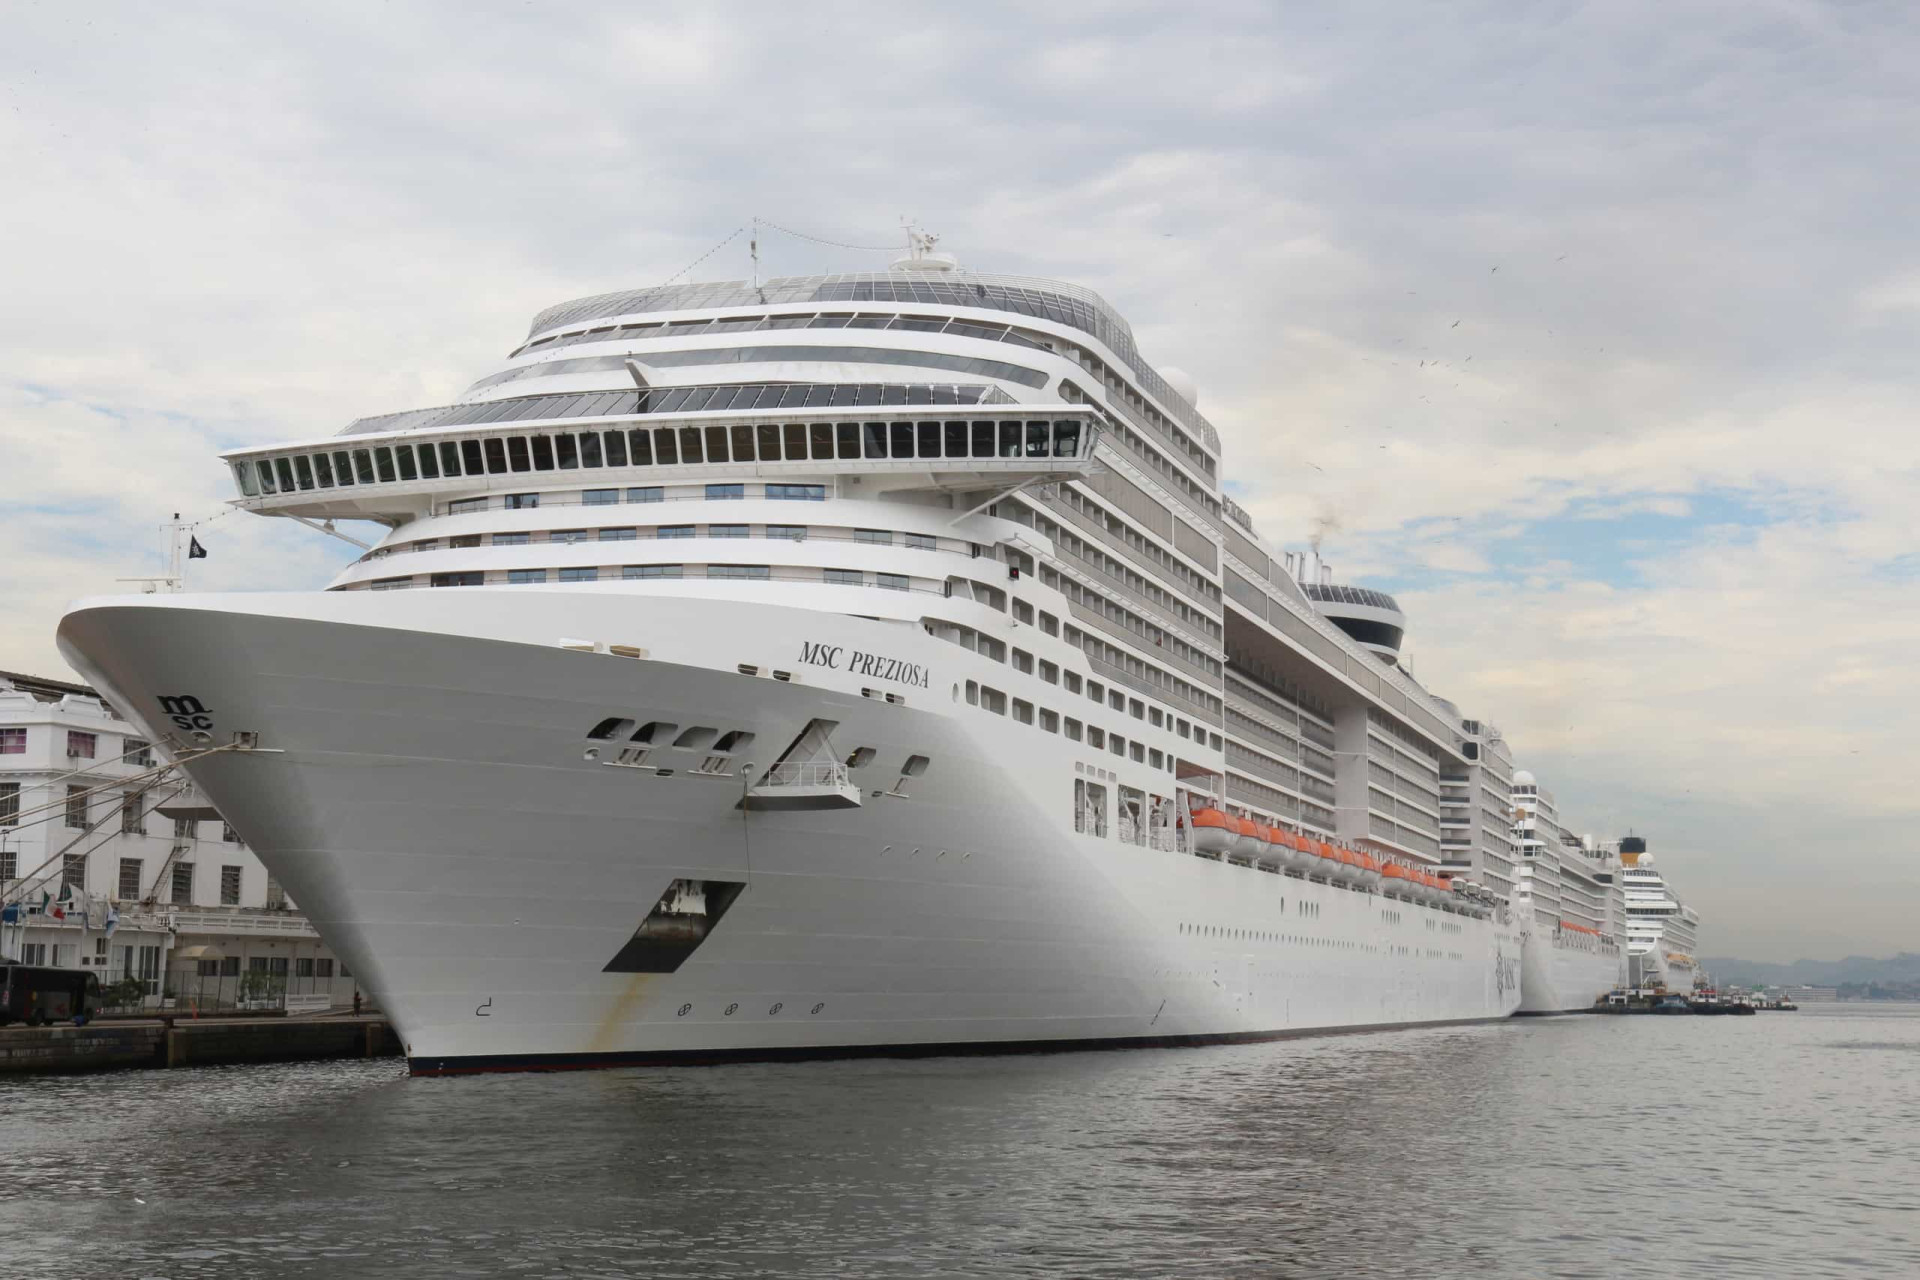 <p>On December 8, 2018, an unidentified Dutch woman fell into the water from the MSC Preziosa near Martinique and her whereabouts remain unknown. The crew was unaware of her disappearance until docking.</p><p><a href="https://www.msn.com/en-us/community/channel/vid-7xx8mnucu55yw63we9va2gwr7uihbxwc68fxqp25x6tg4ftibpra?cvid=94631541bc0f4f89bfd59158d696ad7e">Follow us and access great exclusive content every day</a></p>